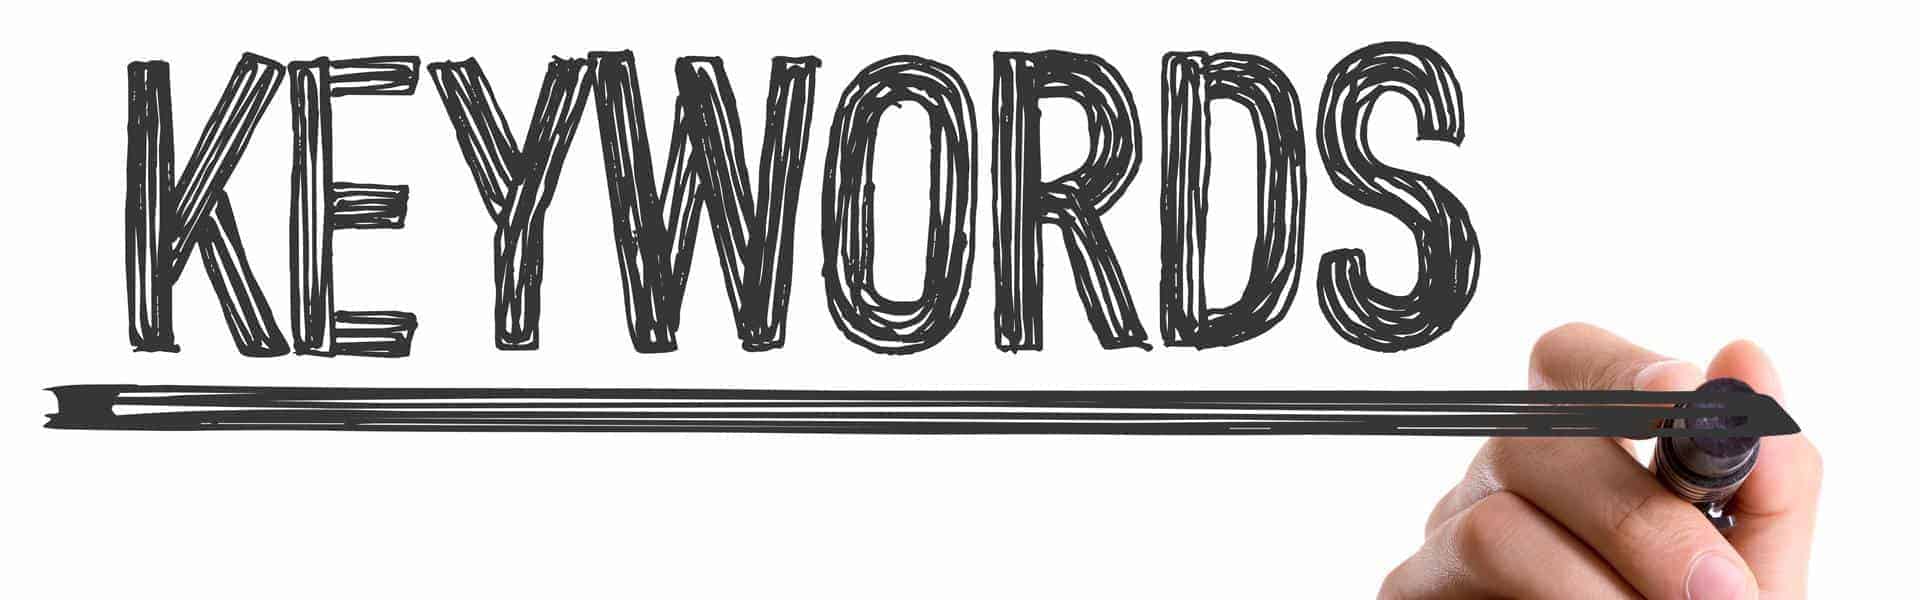 SEO Content Writing: How To Use Keywords Correctly